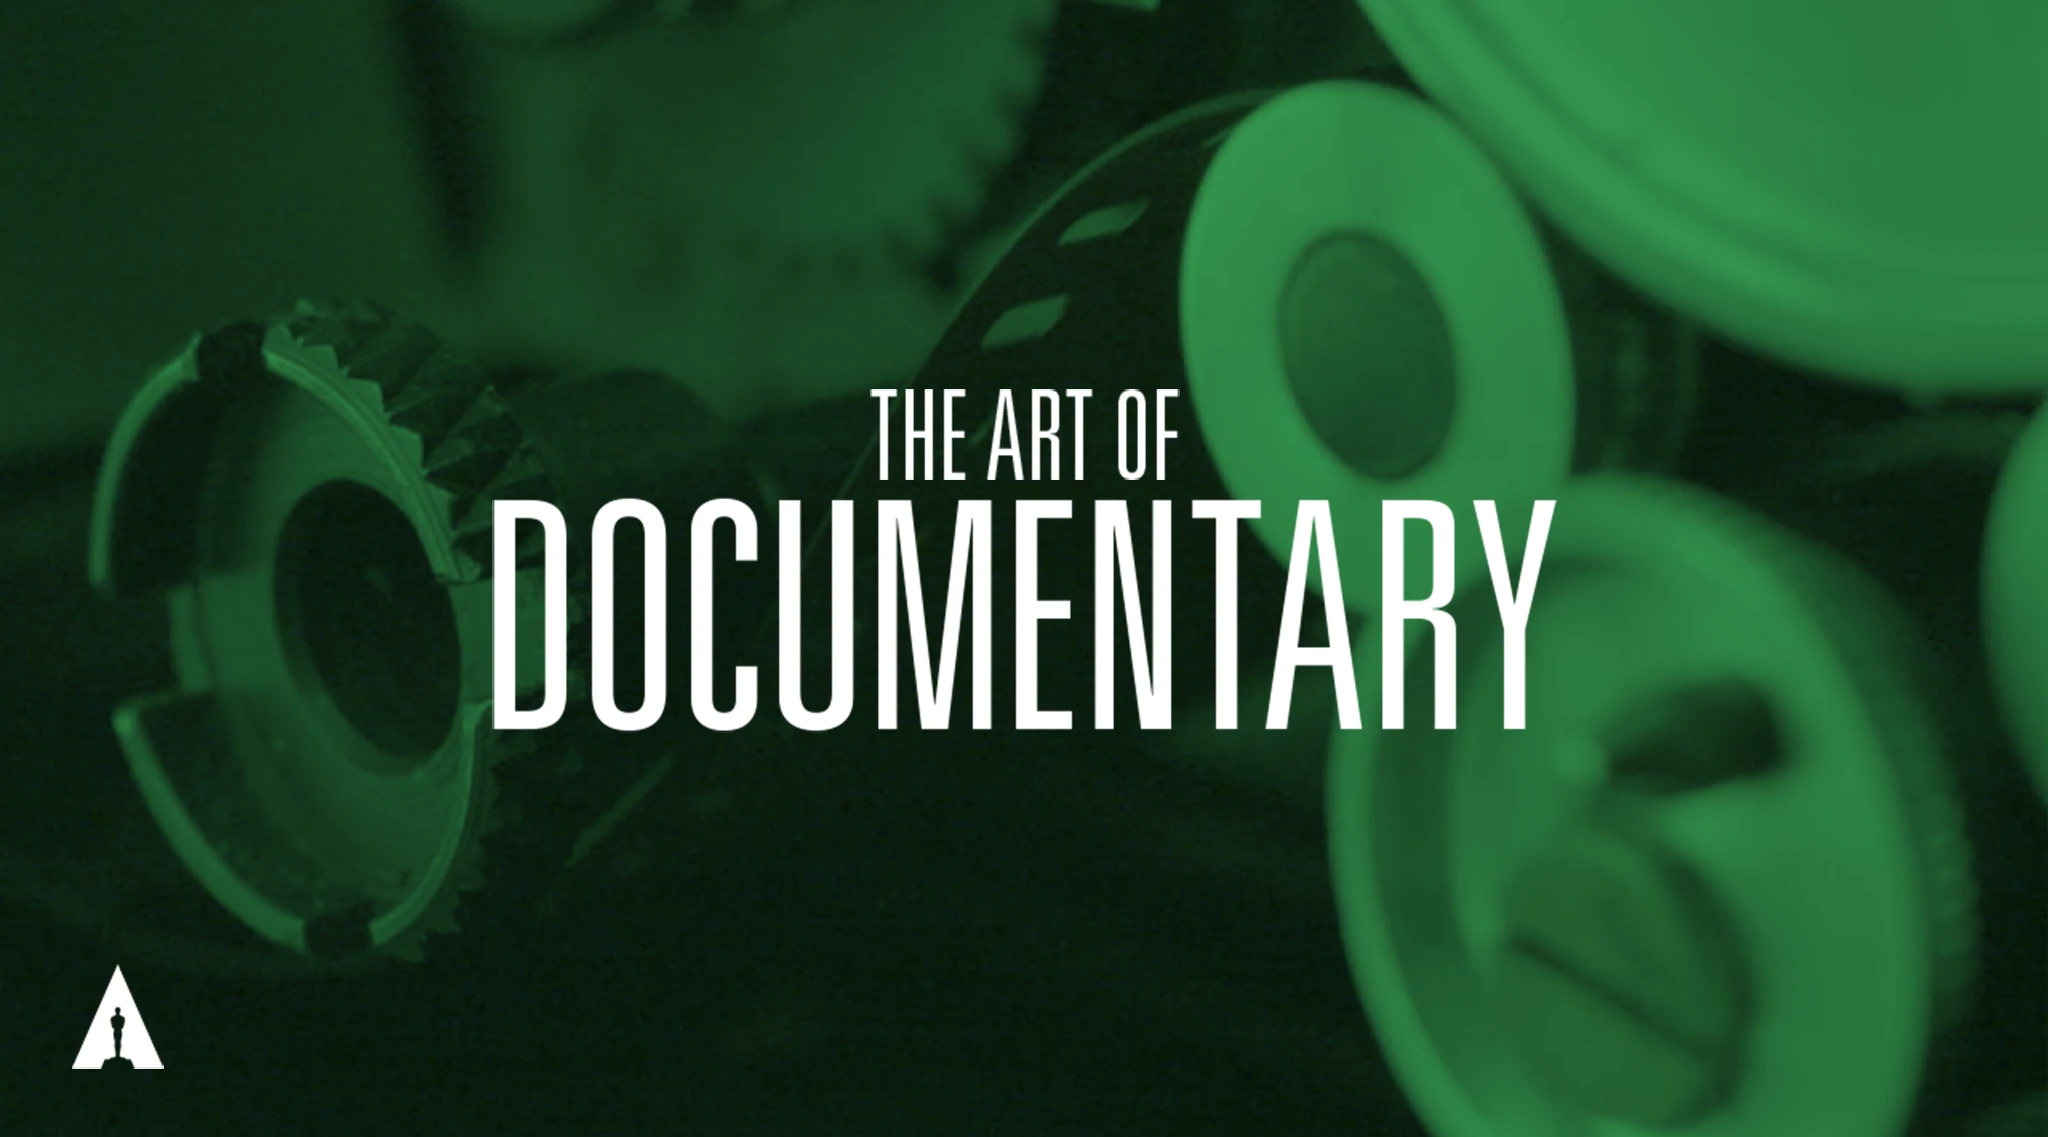 'The Art of Documentary' Podcast: Listen to Episode 6 With Roger Ross Williams